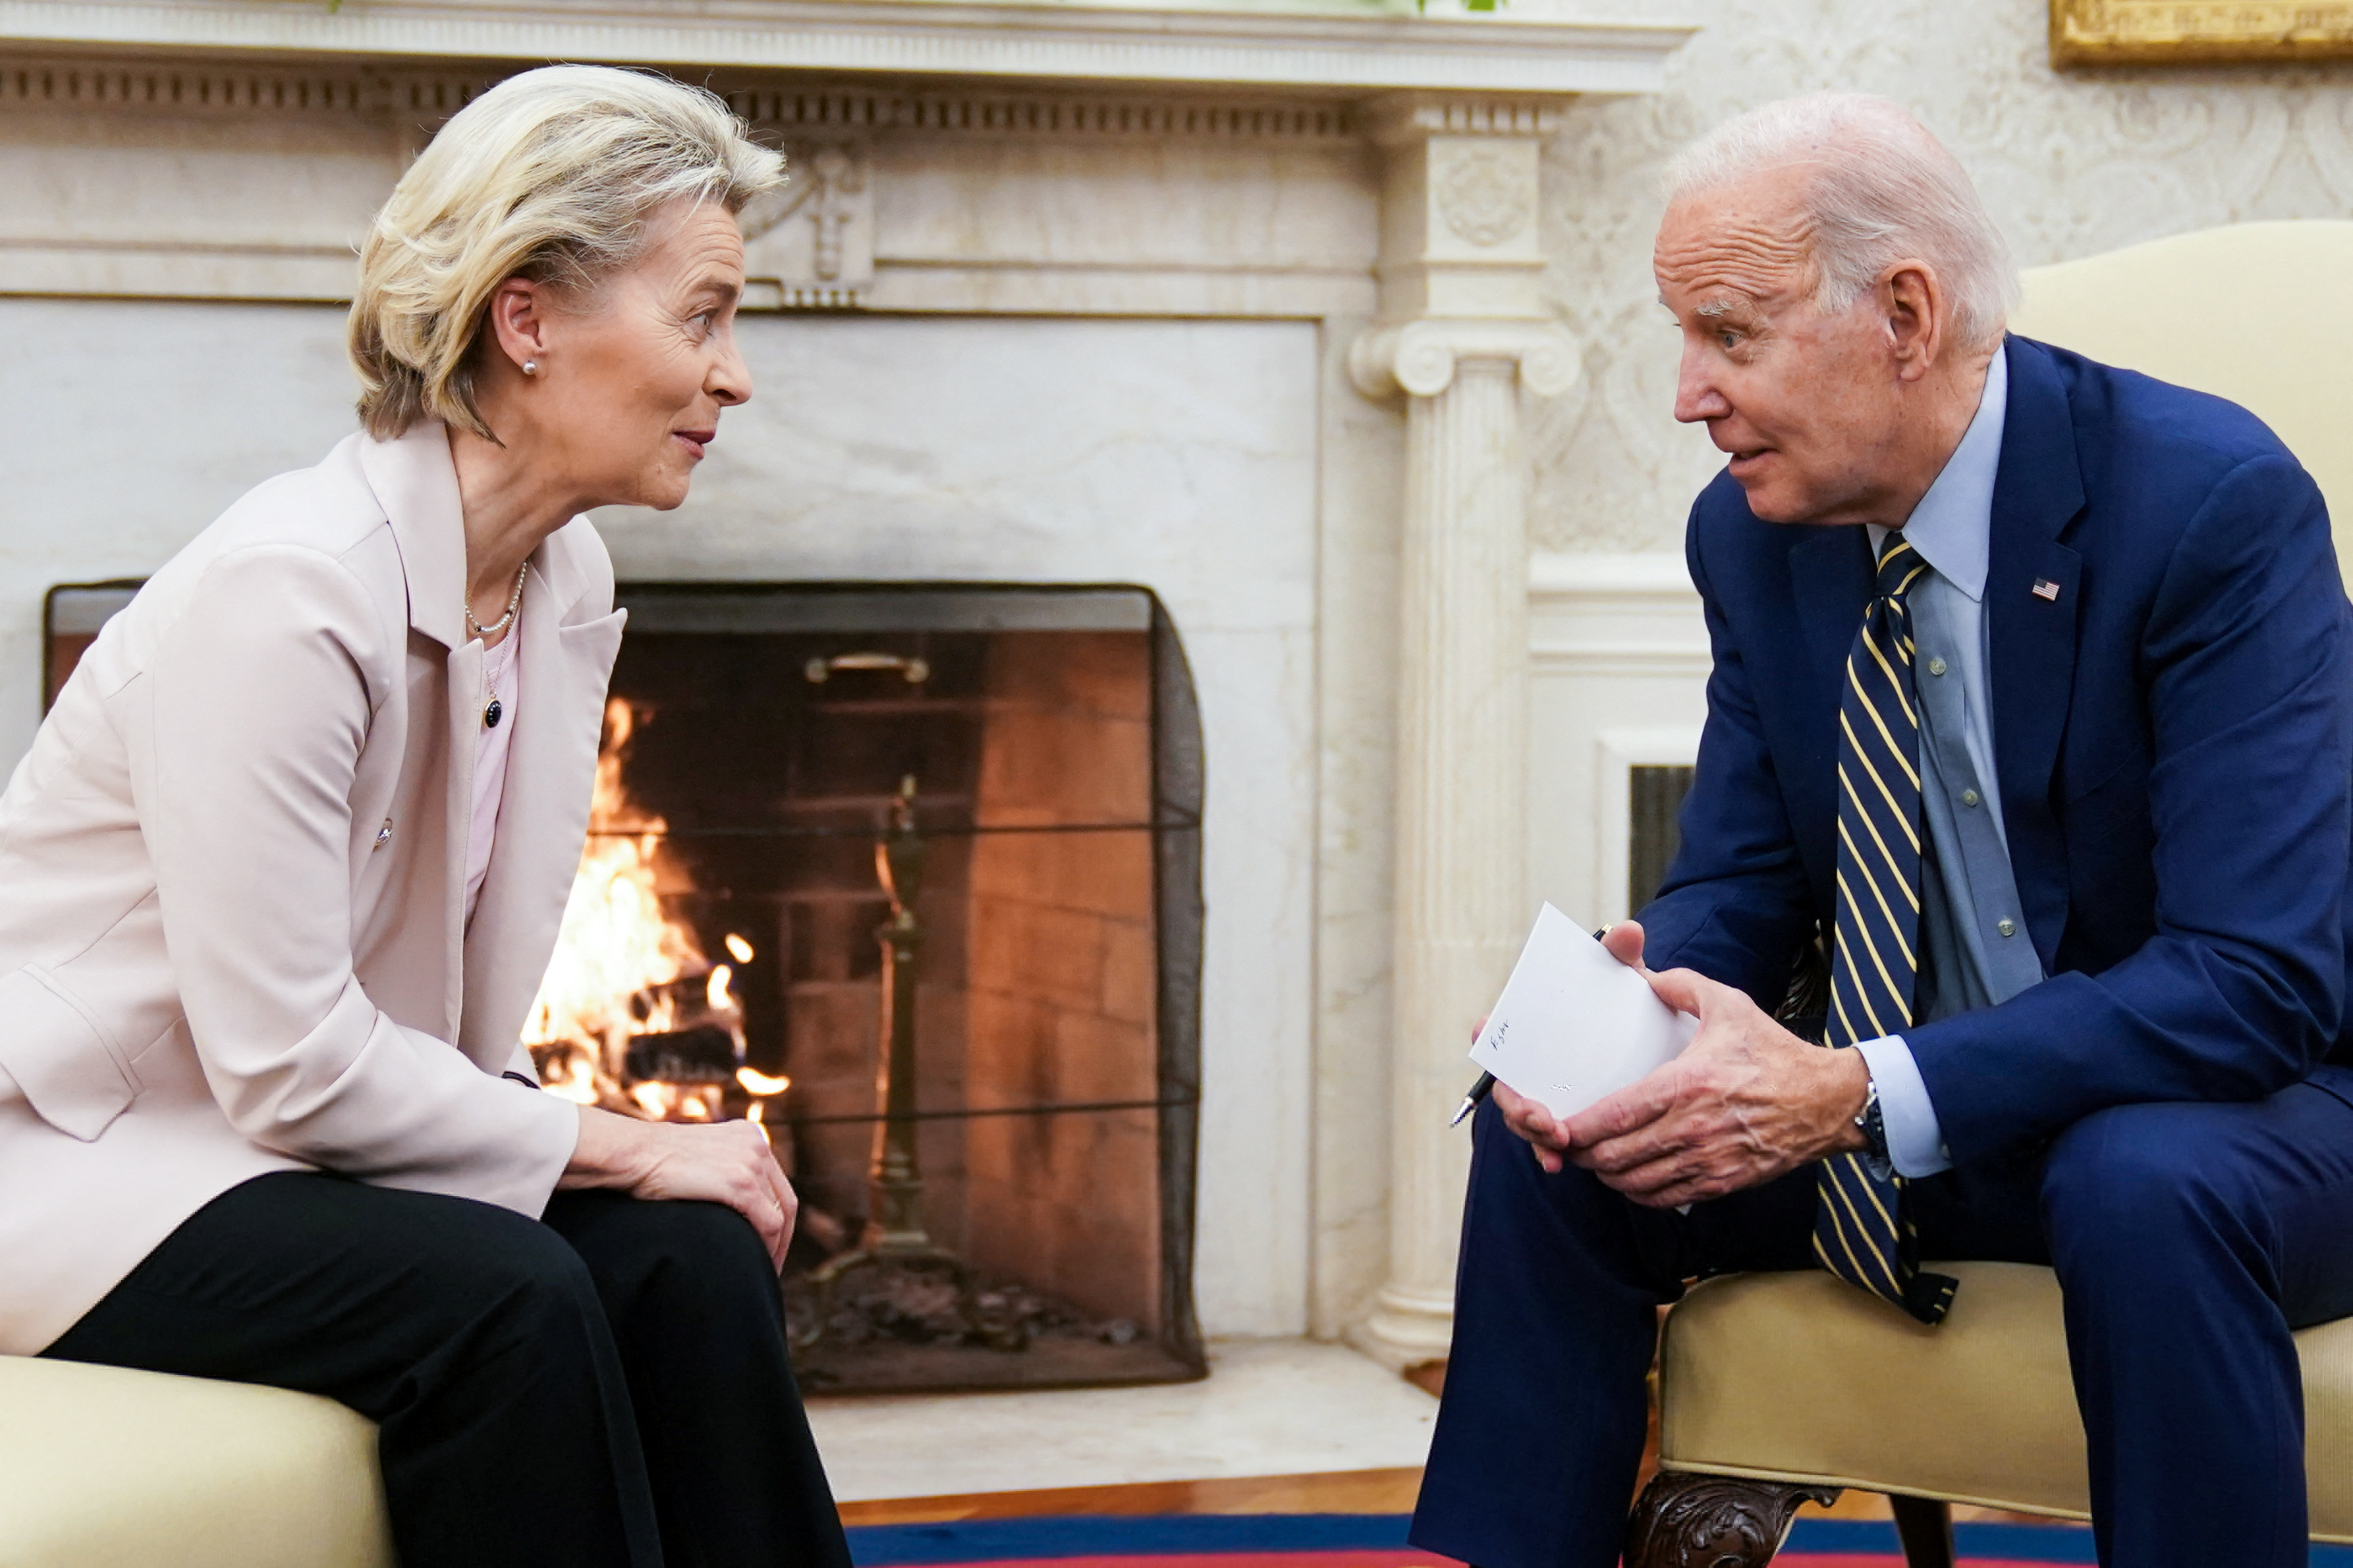 EU's von der Leyen says she and Biden agreed to dialogue on clean tech | Reuters